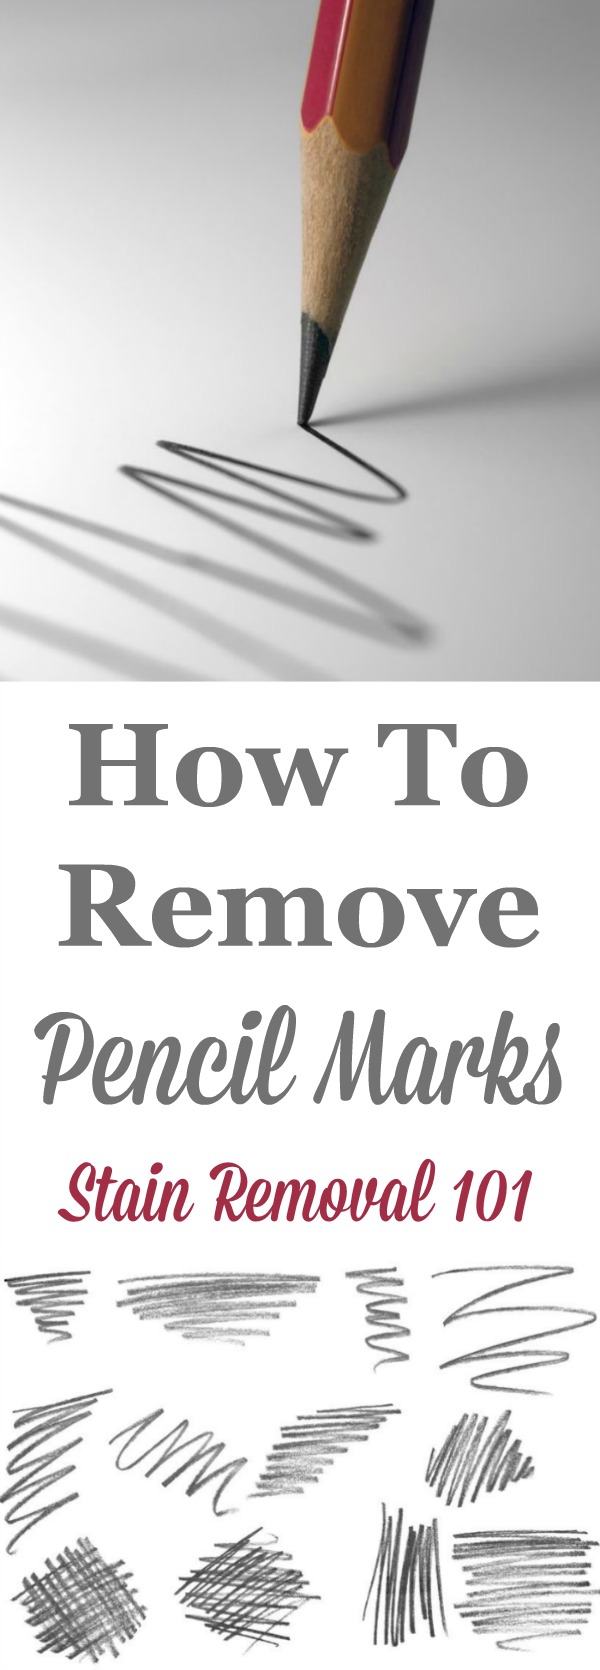 How to remove pencil marks and scribbles around your home from clothes, upholstery and carpet, as well as hard surfaces like walls, counters and more {on Stain Removal 101} #RemovePencilMarks #PencilMarks #StainRemovalGuide